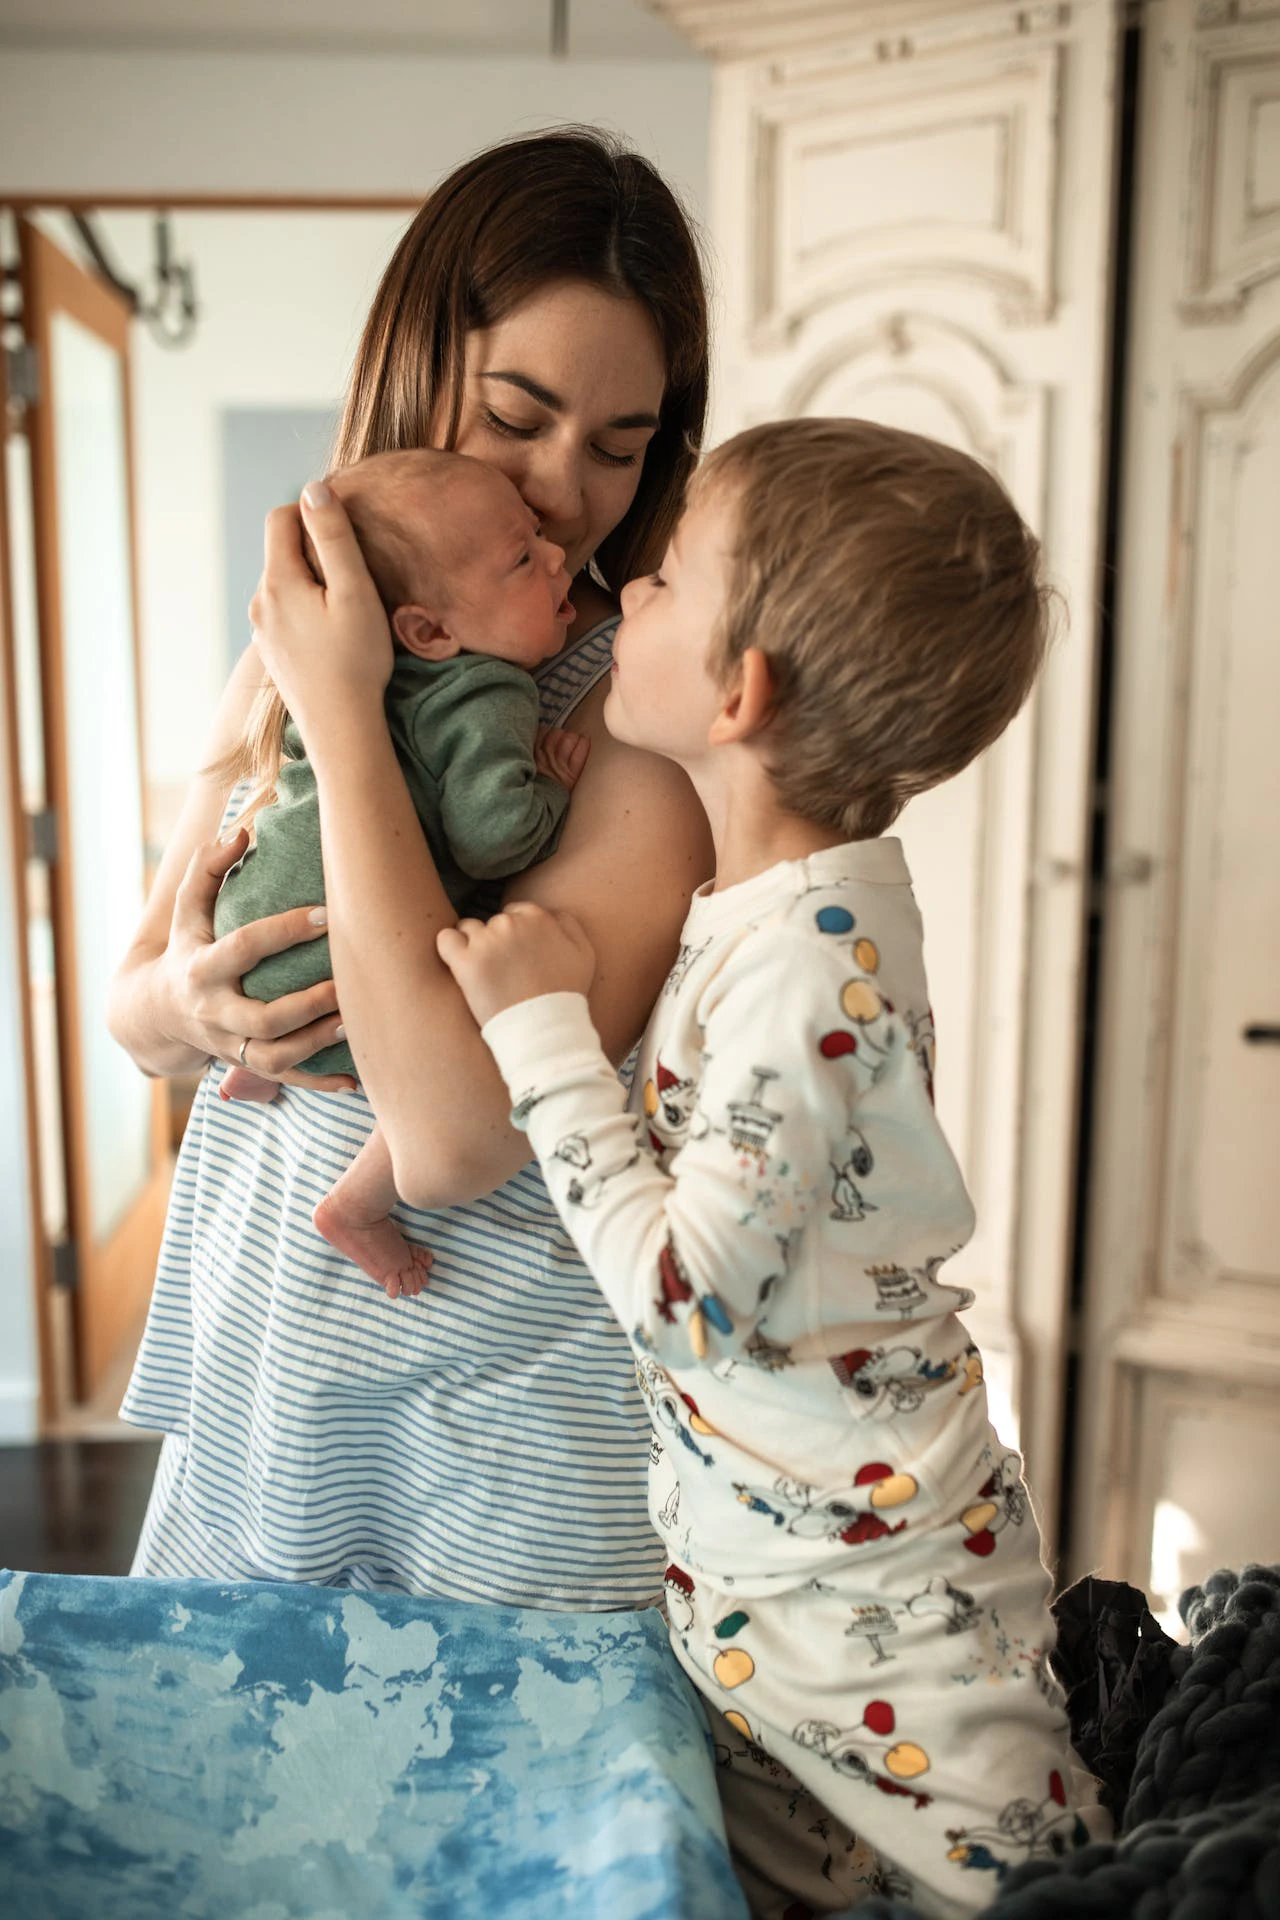 Boy Embracing his Mother Holding a Newborn Baby